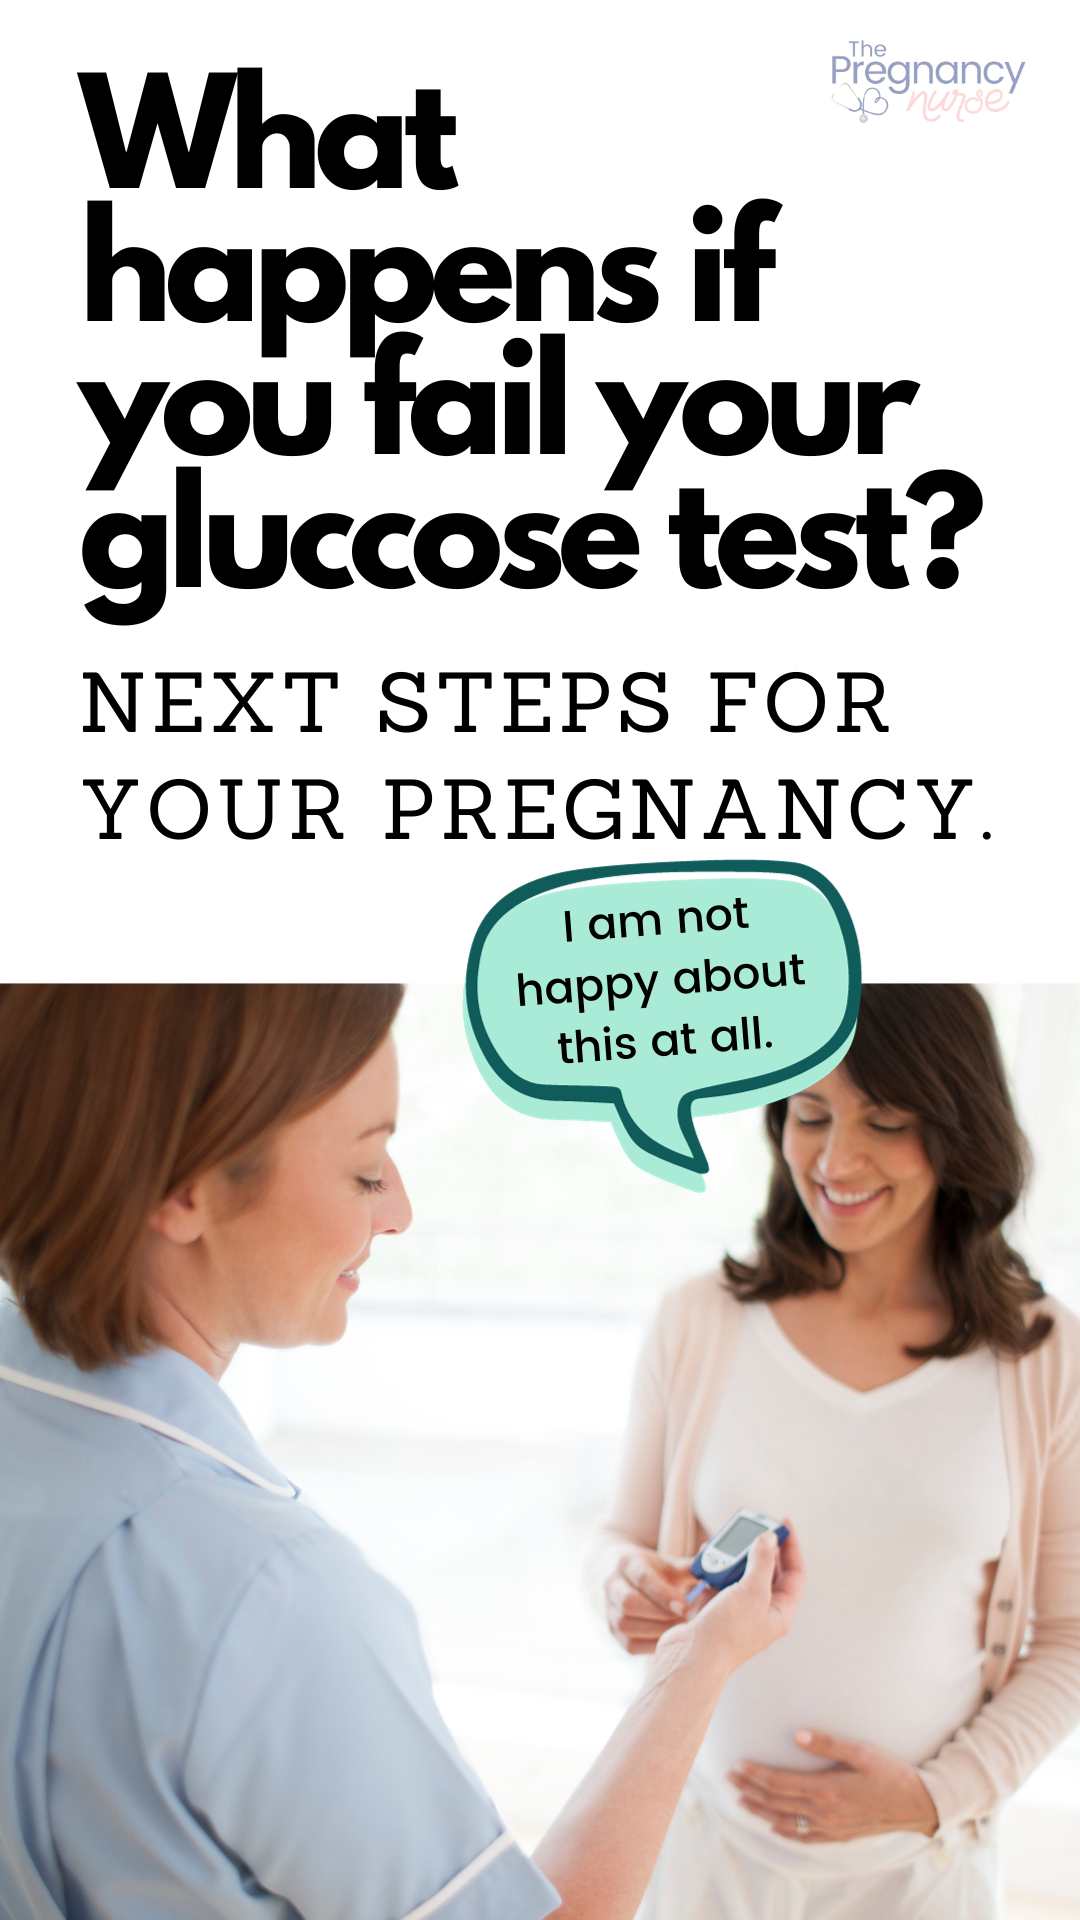 what happens if you fail your glucose test / next steps for your pregnancy / pregnant woman having glucose tested saying "I am not happy about this"